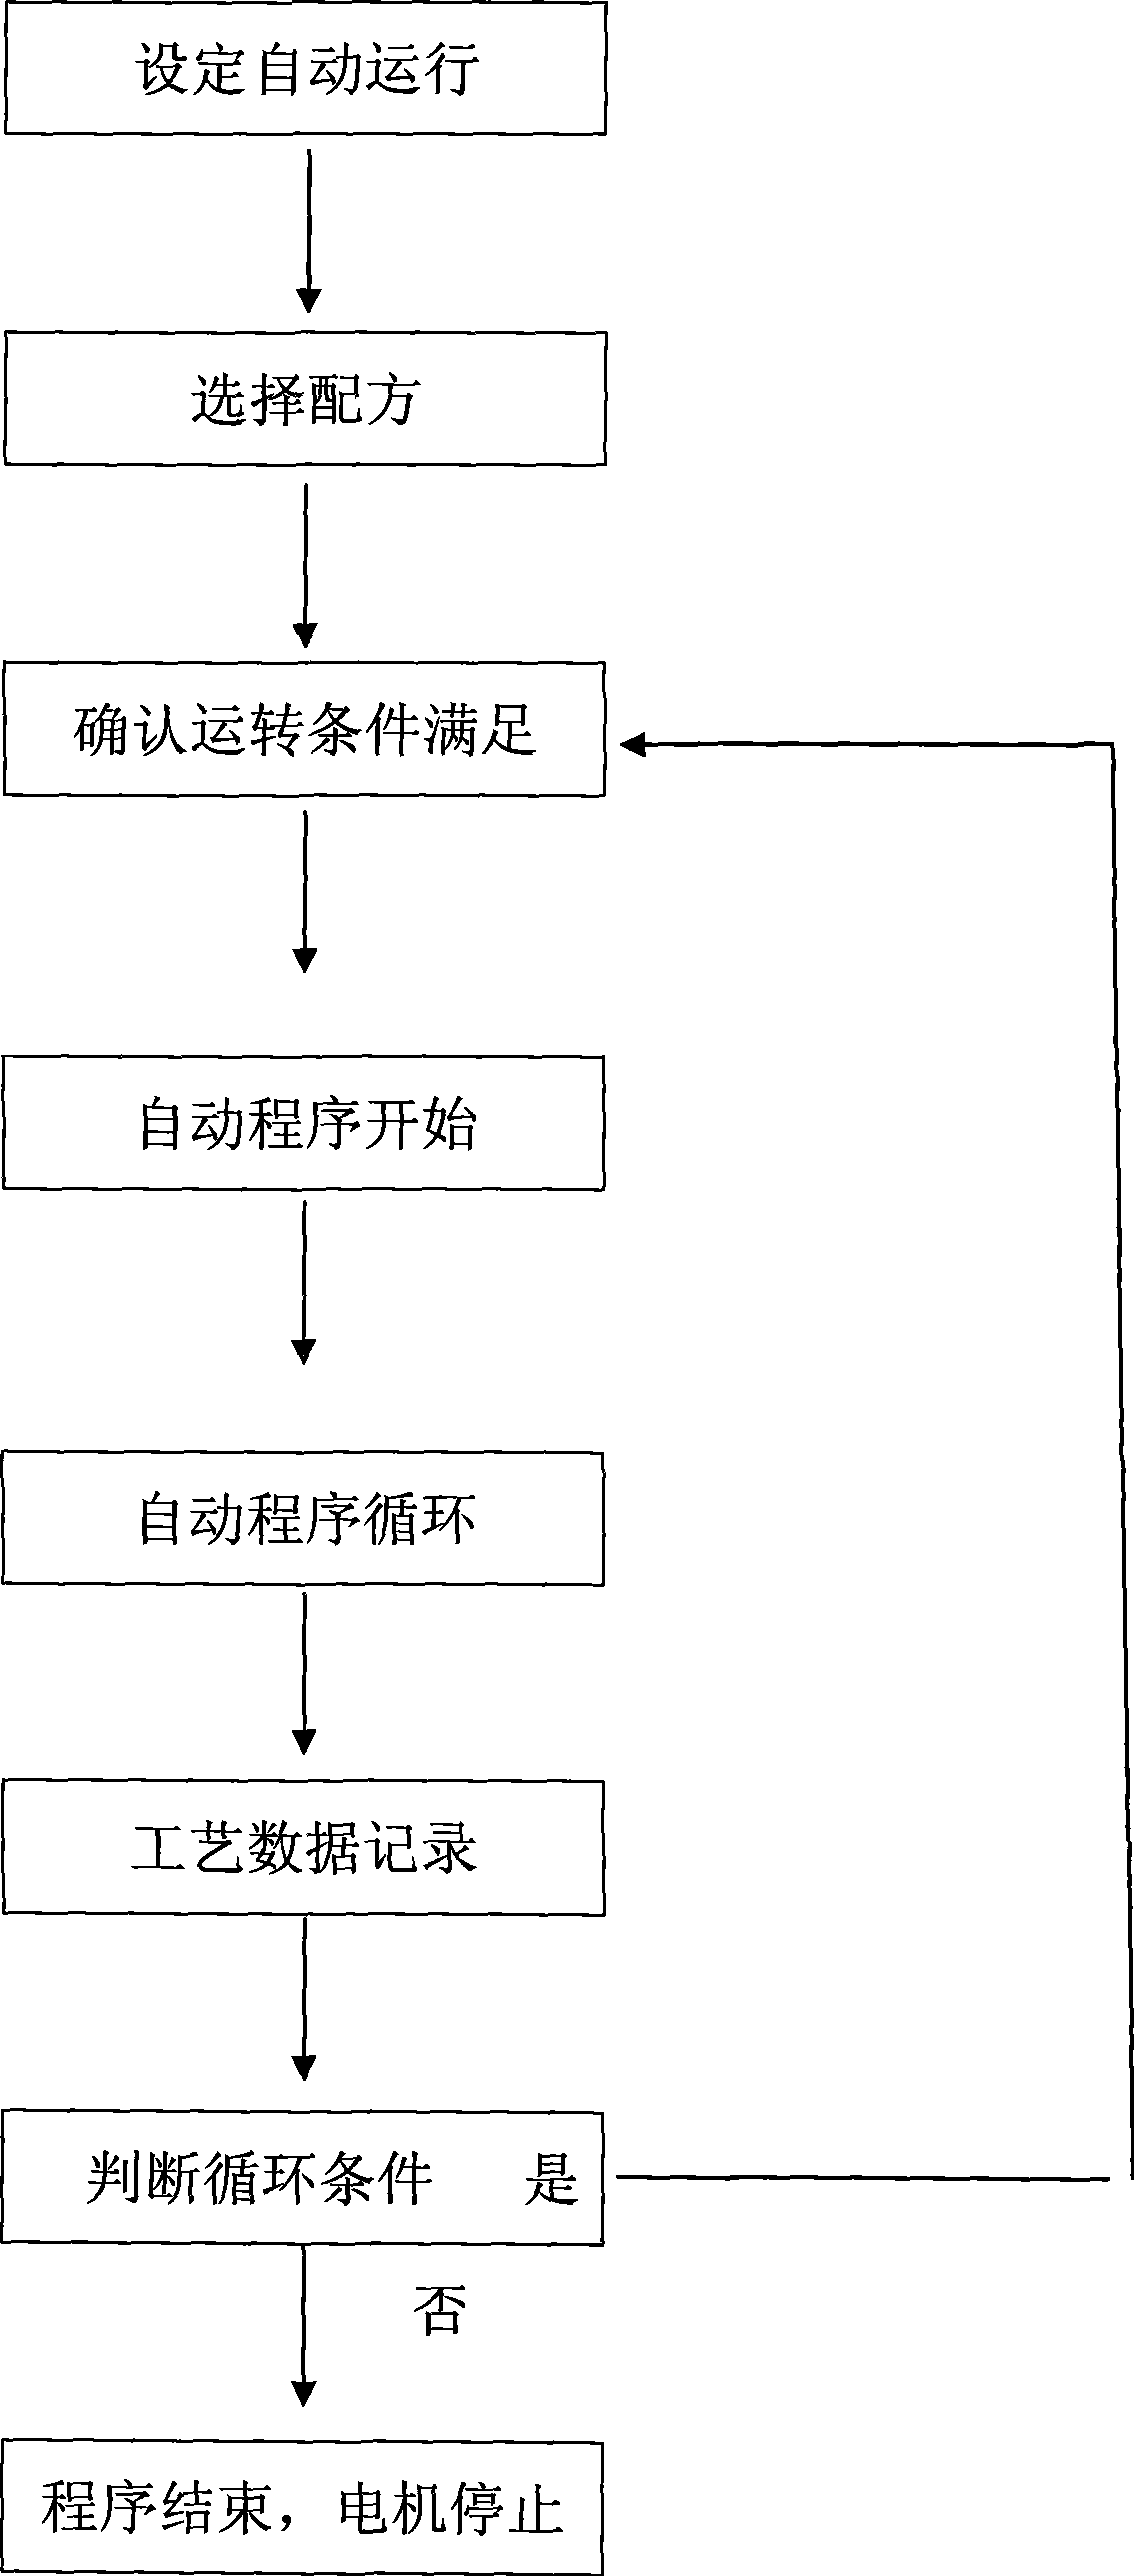 Formulation management and technique control system of closed-smelting machine